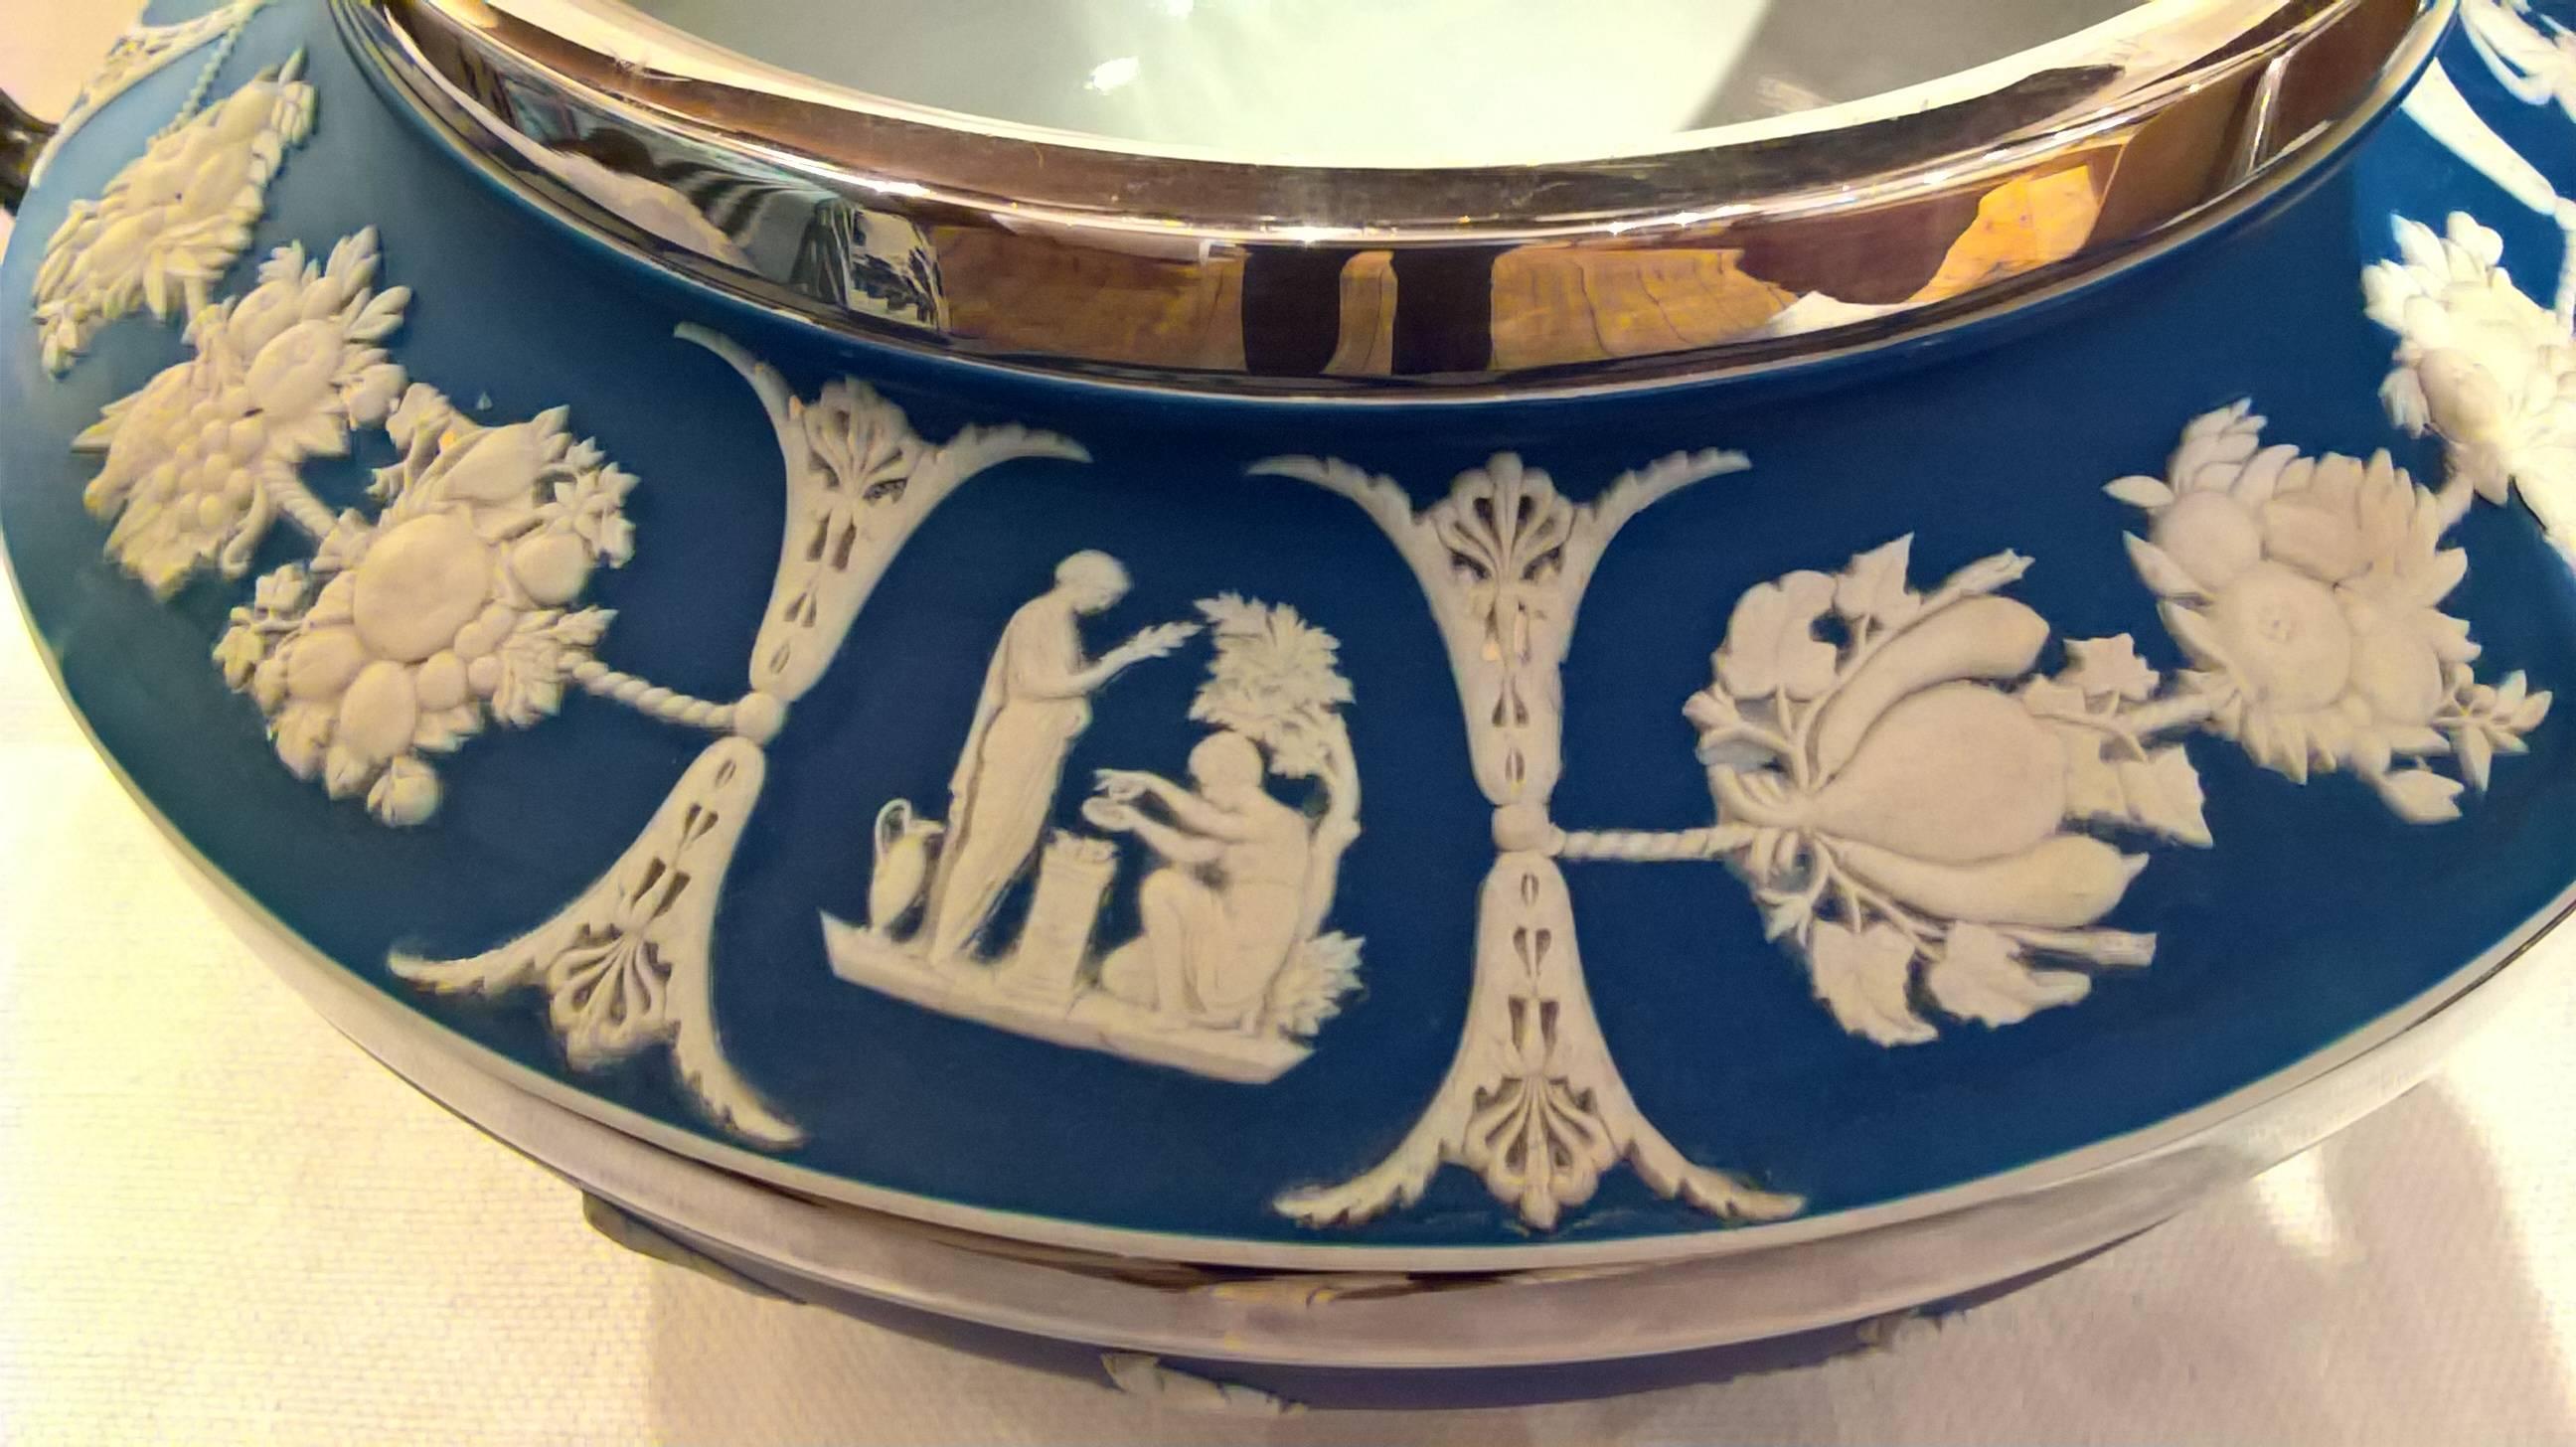 Large blue salad bowl or jardiniere from wedgwood in classic wedgwood decor and silver plated details and two handlings. Marked Wedgwood at the bottom. Looks also great with flowers.